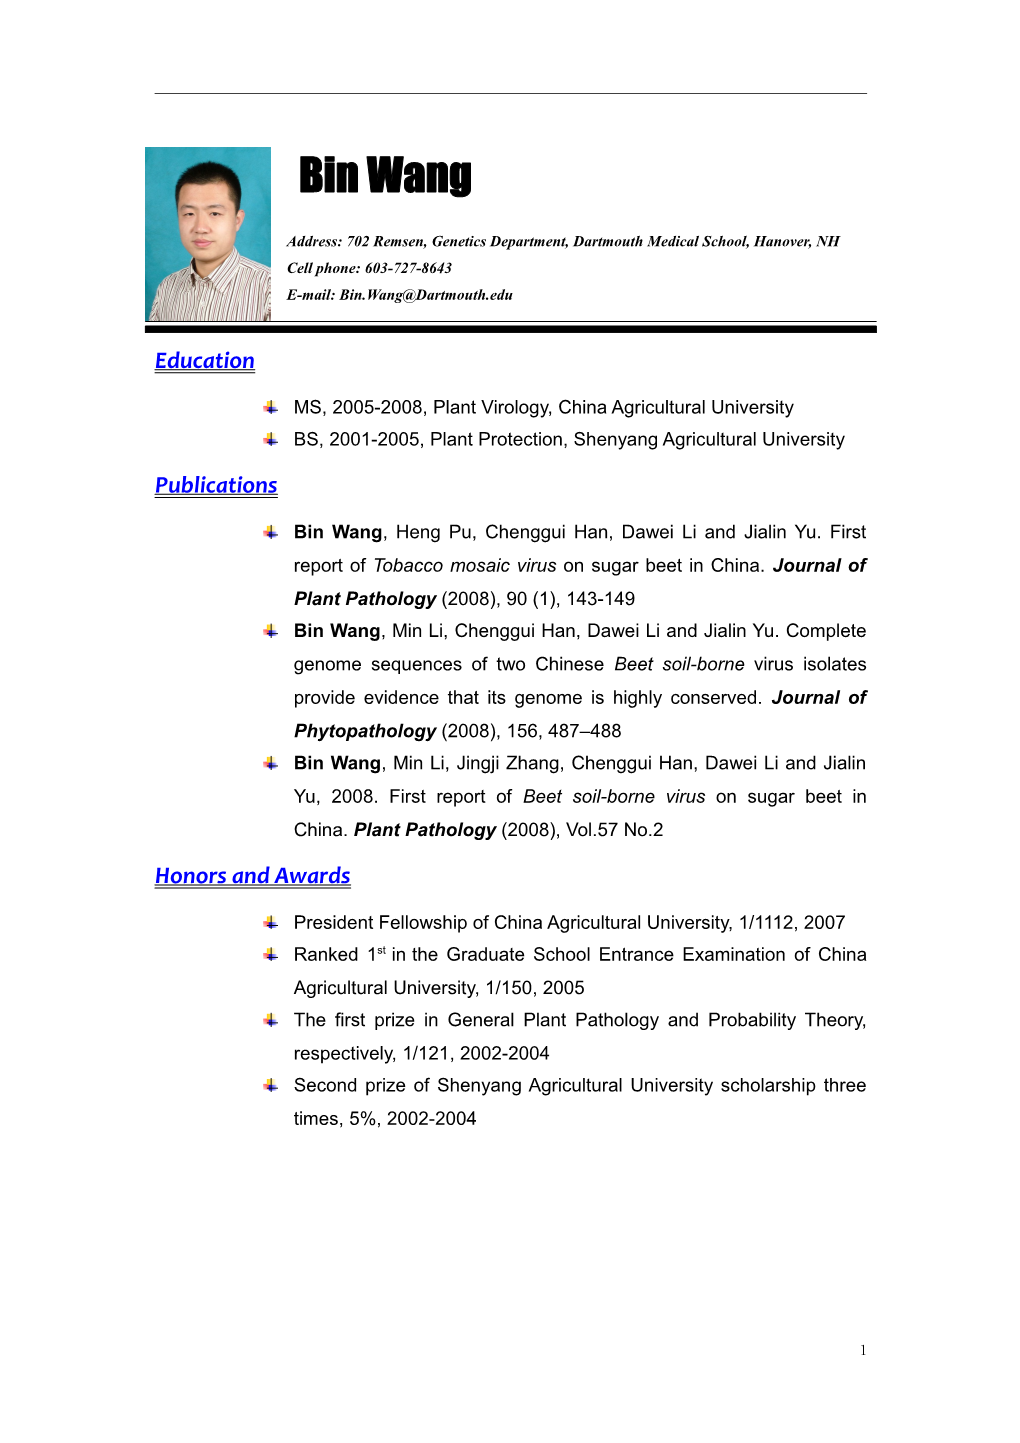 MS, 2005-2008, Plant Virology, China Agricultural University